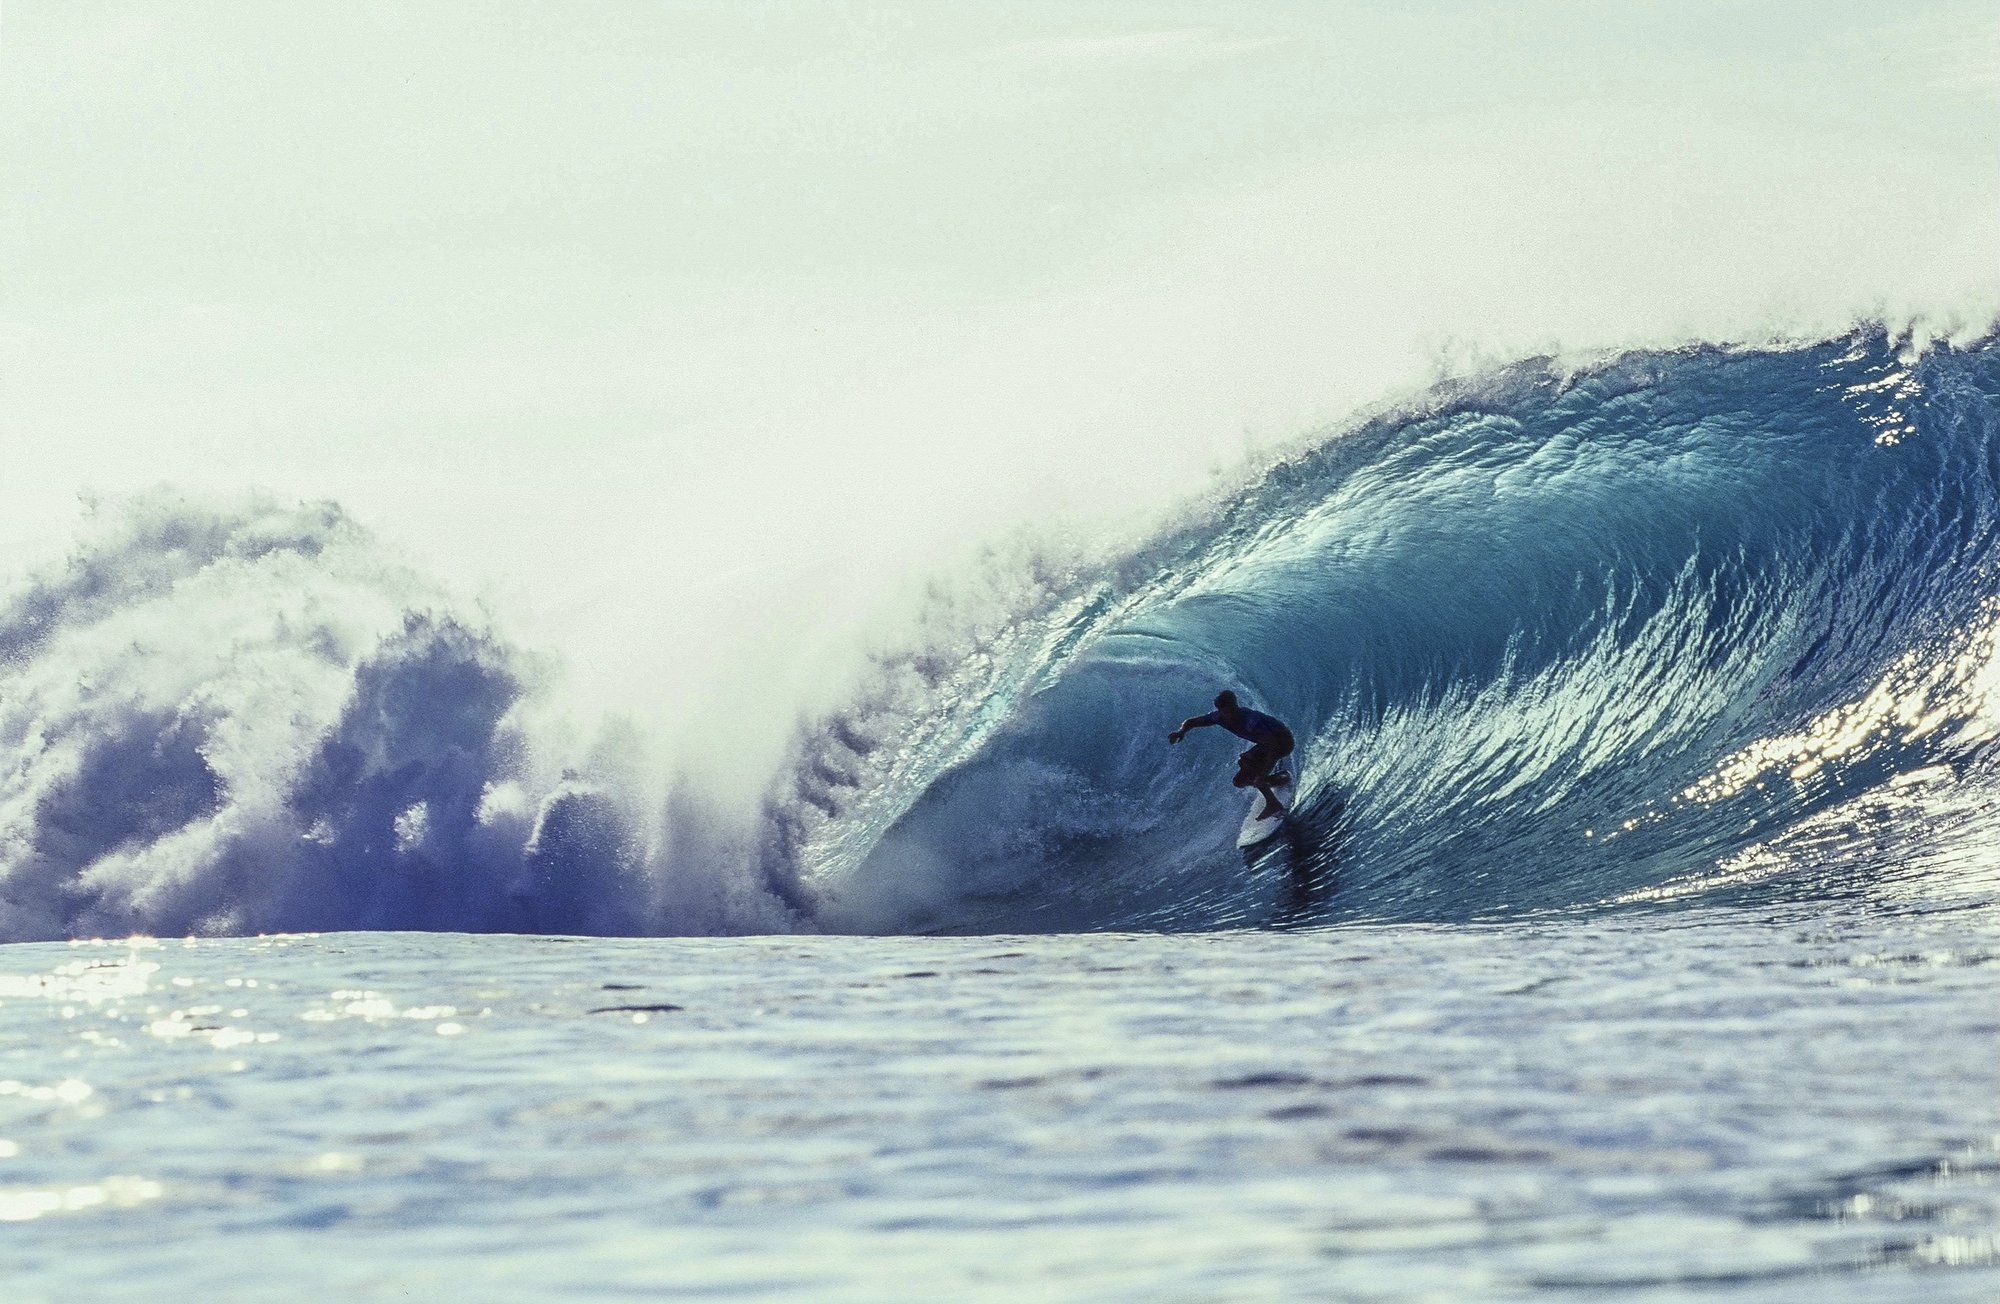 Bruce Irons, Pipeline, North Shore, Oahu On Film 